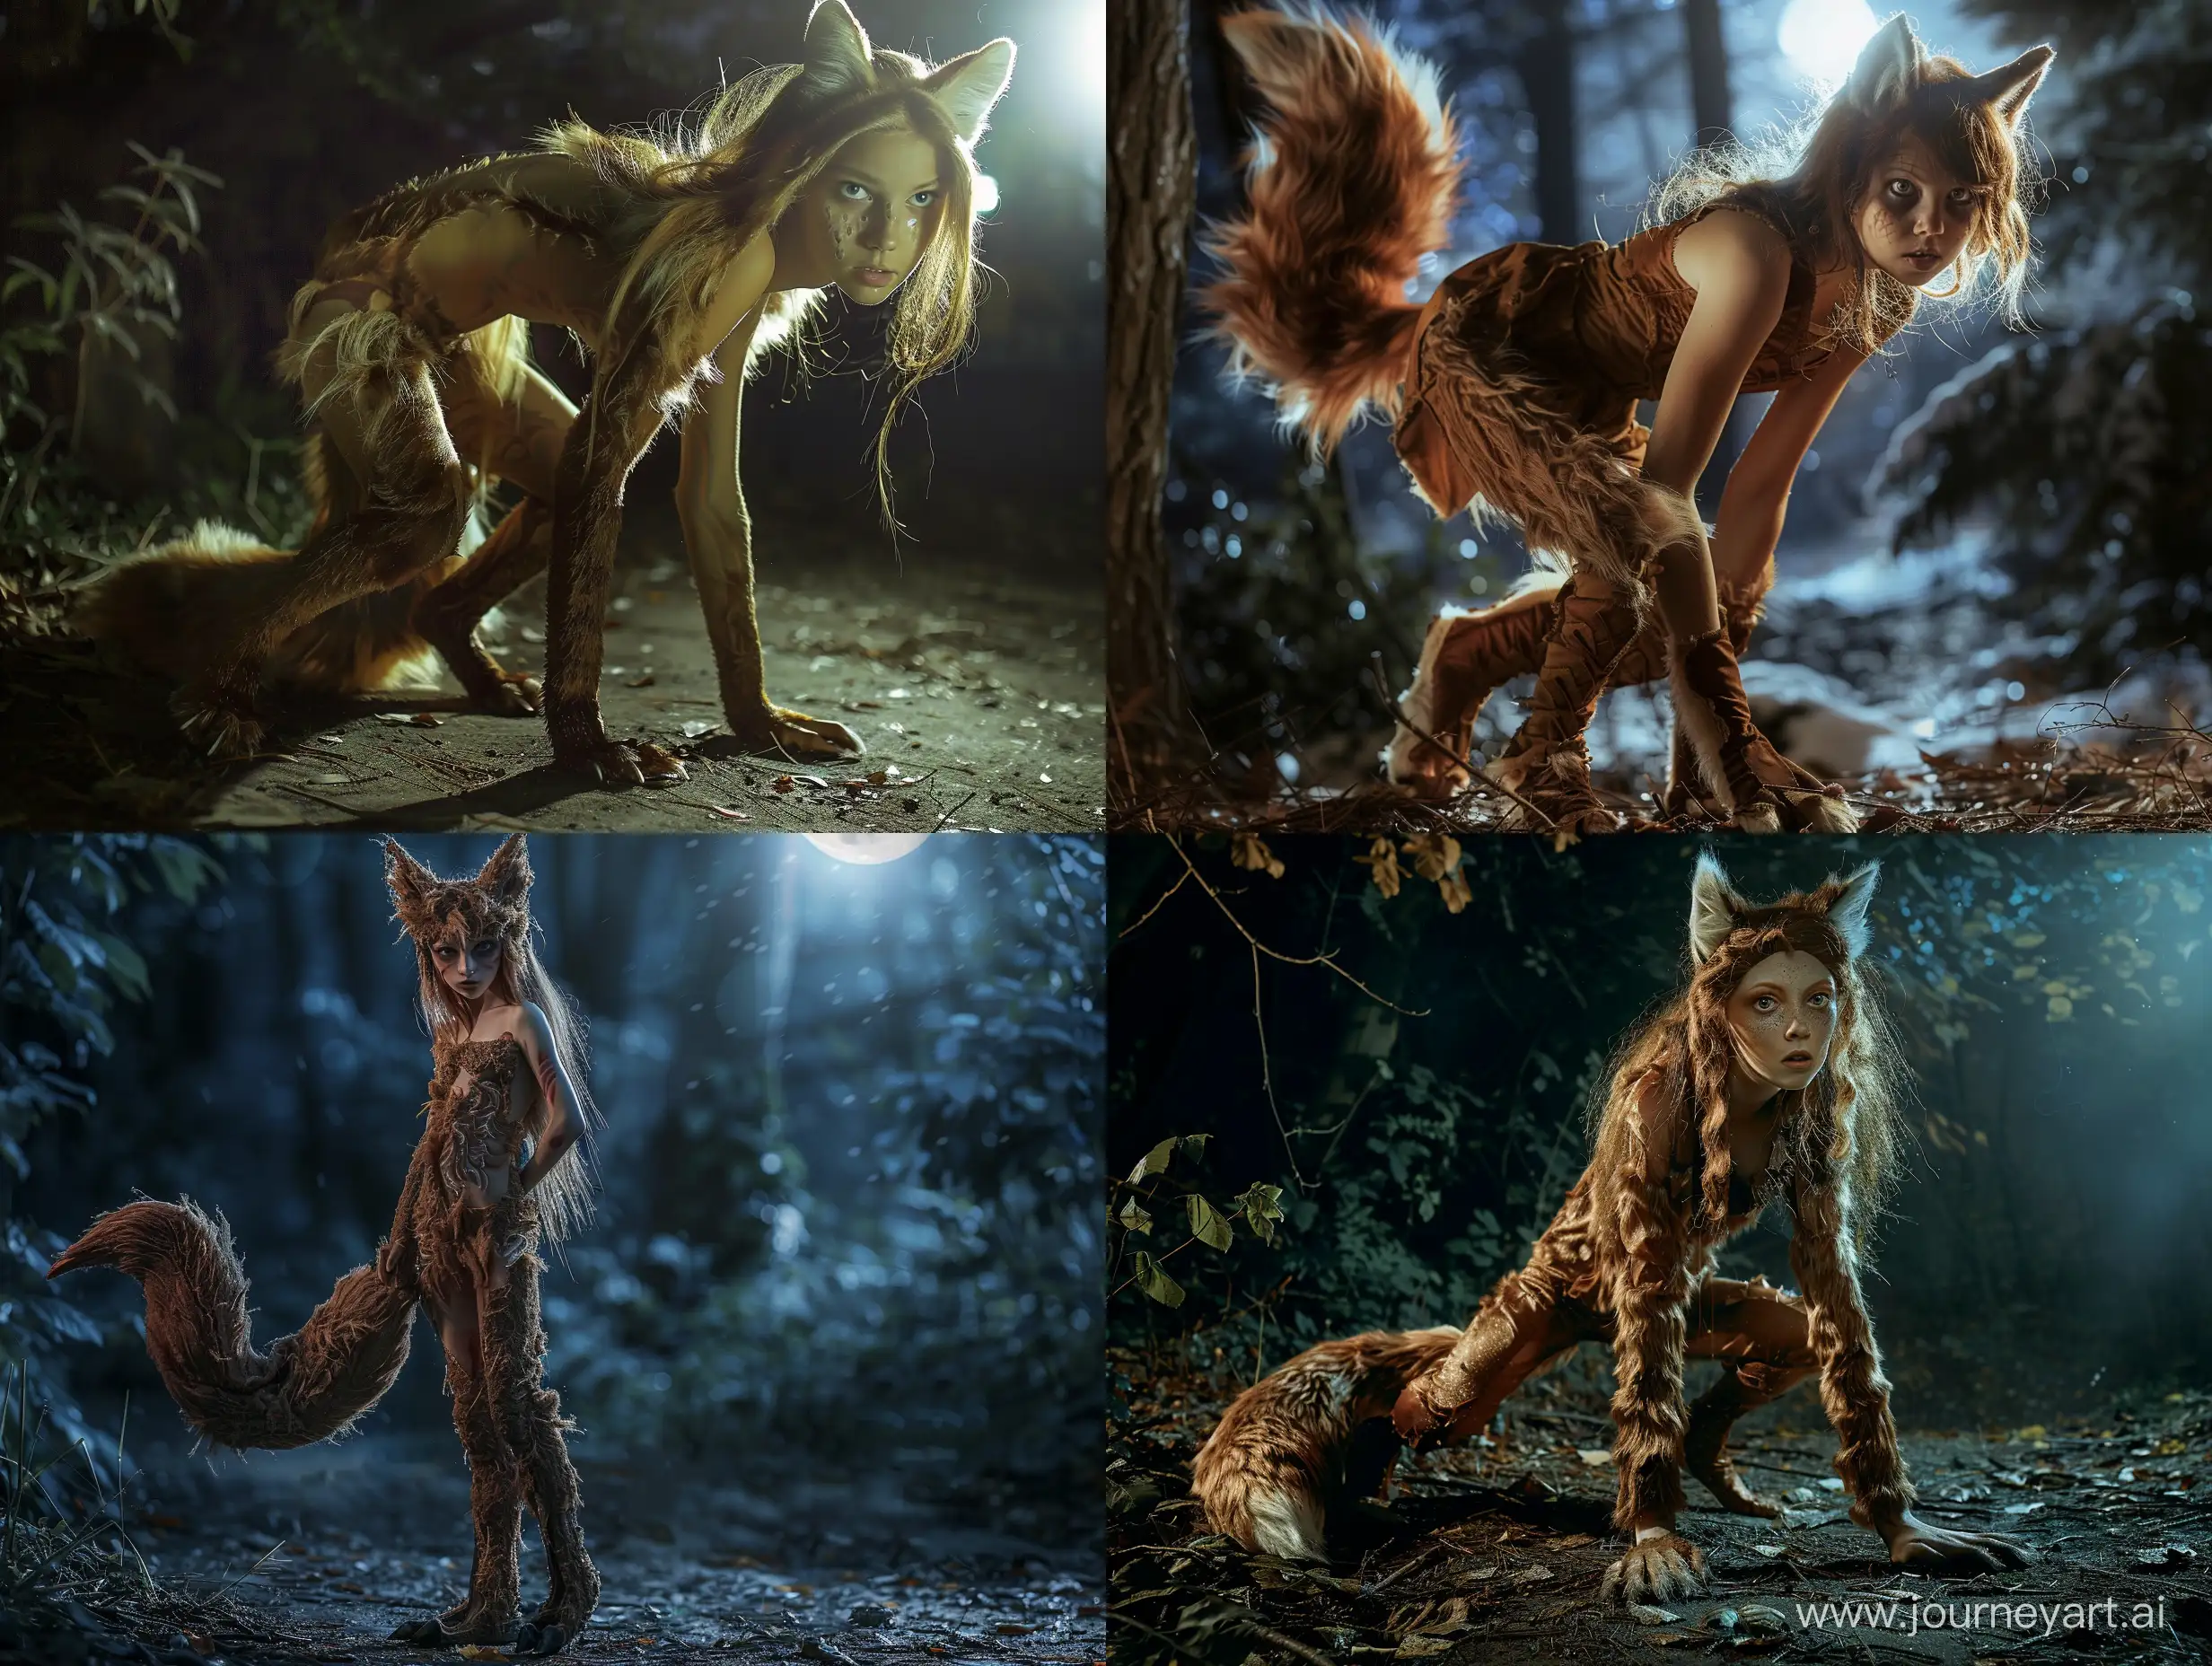 Young-Woman-Transforms-into-Fox-in-Enchanted-Forest-at-Night